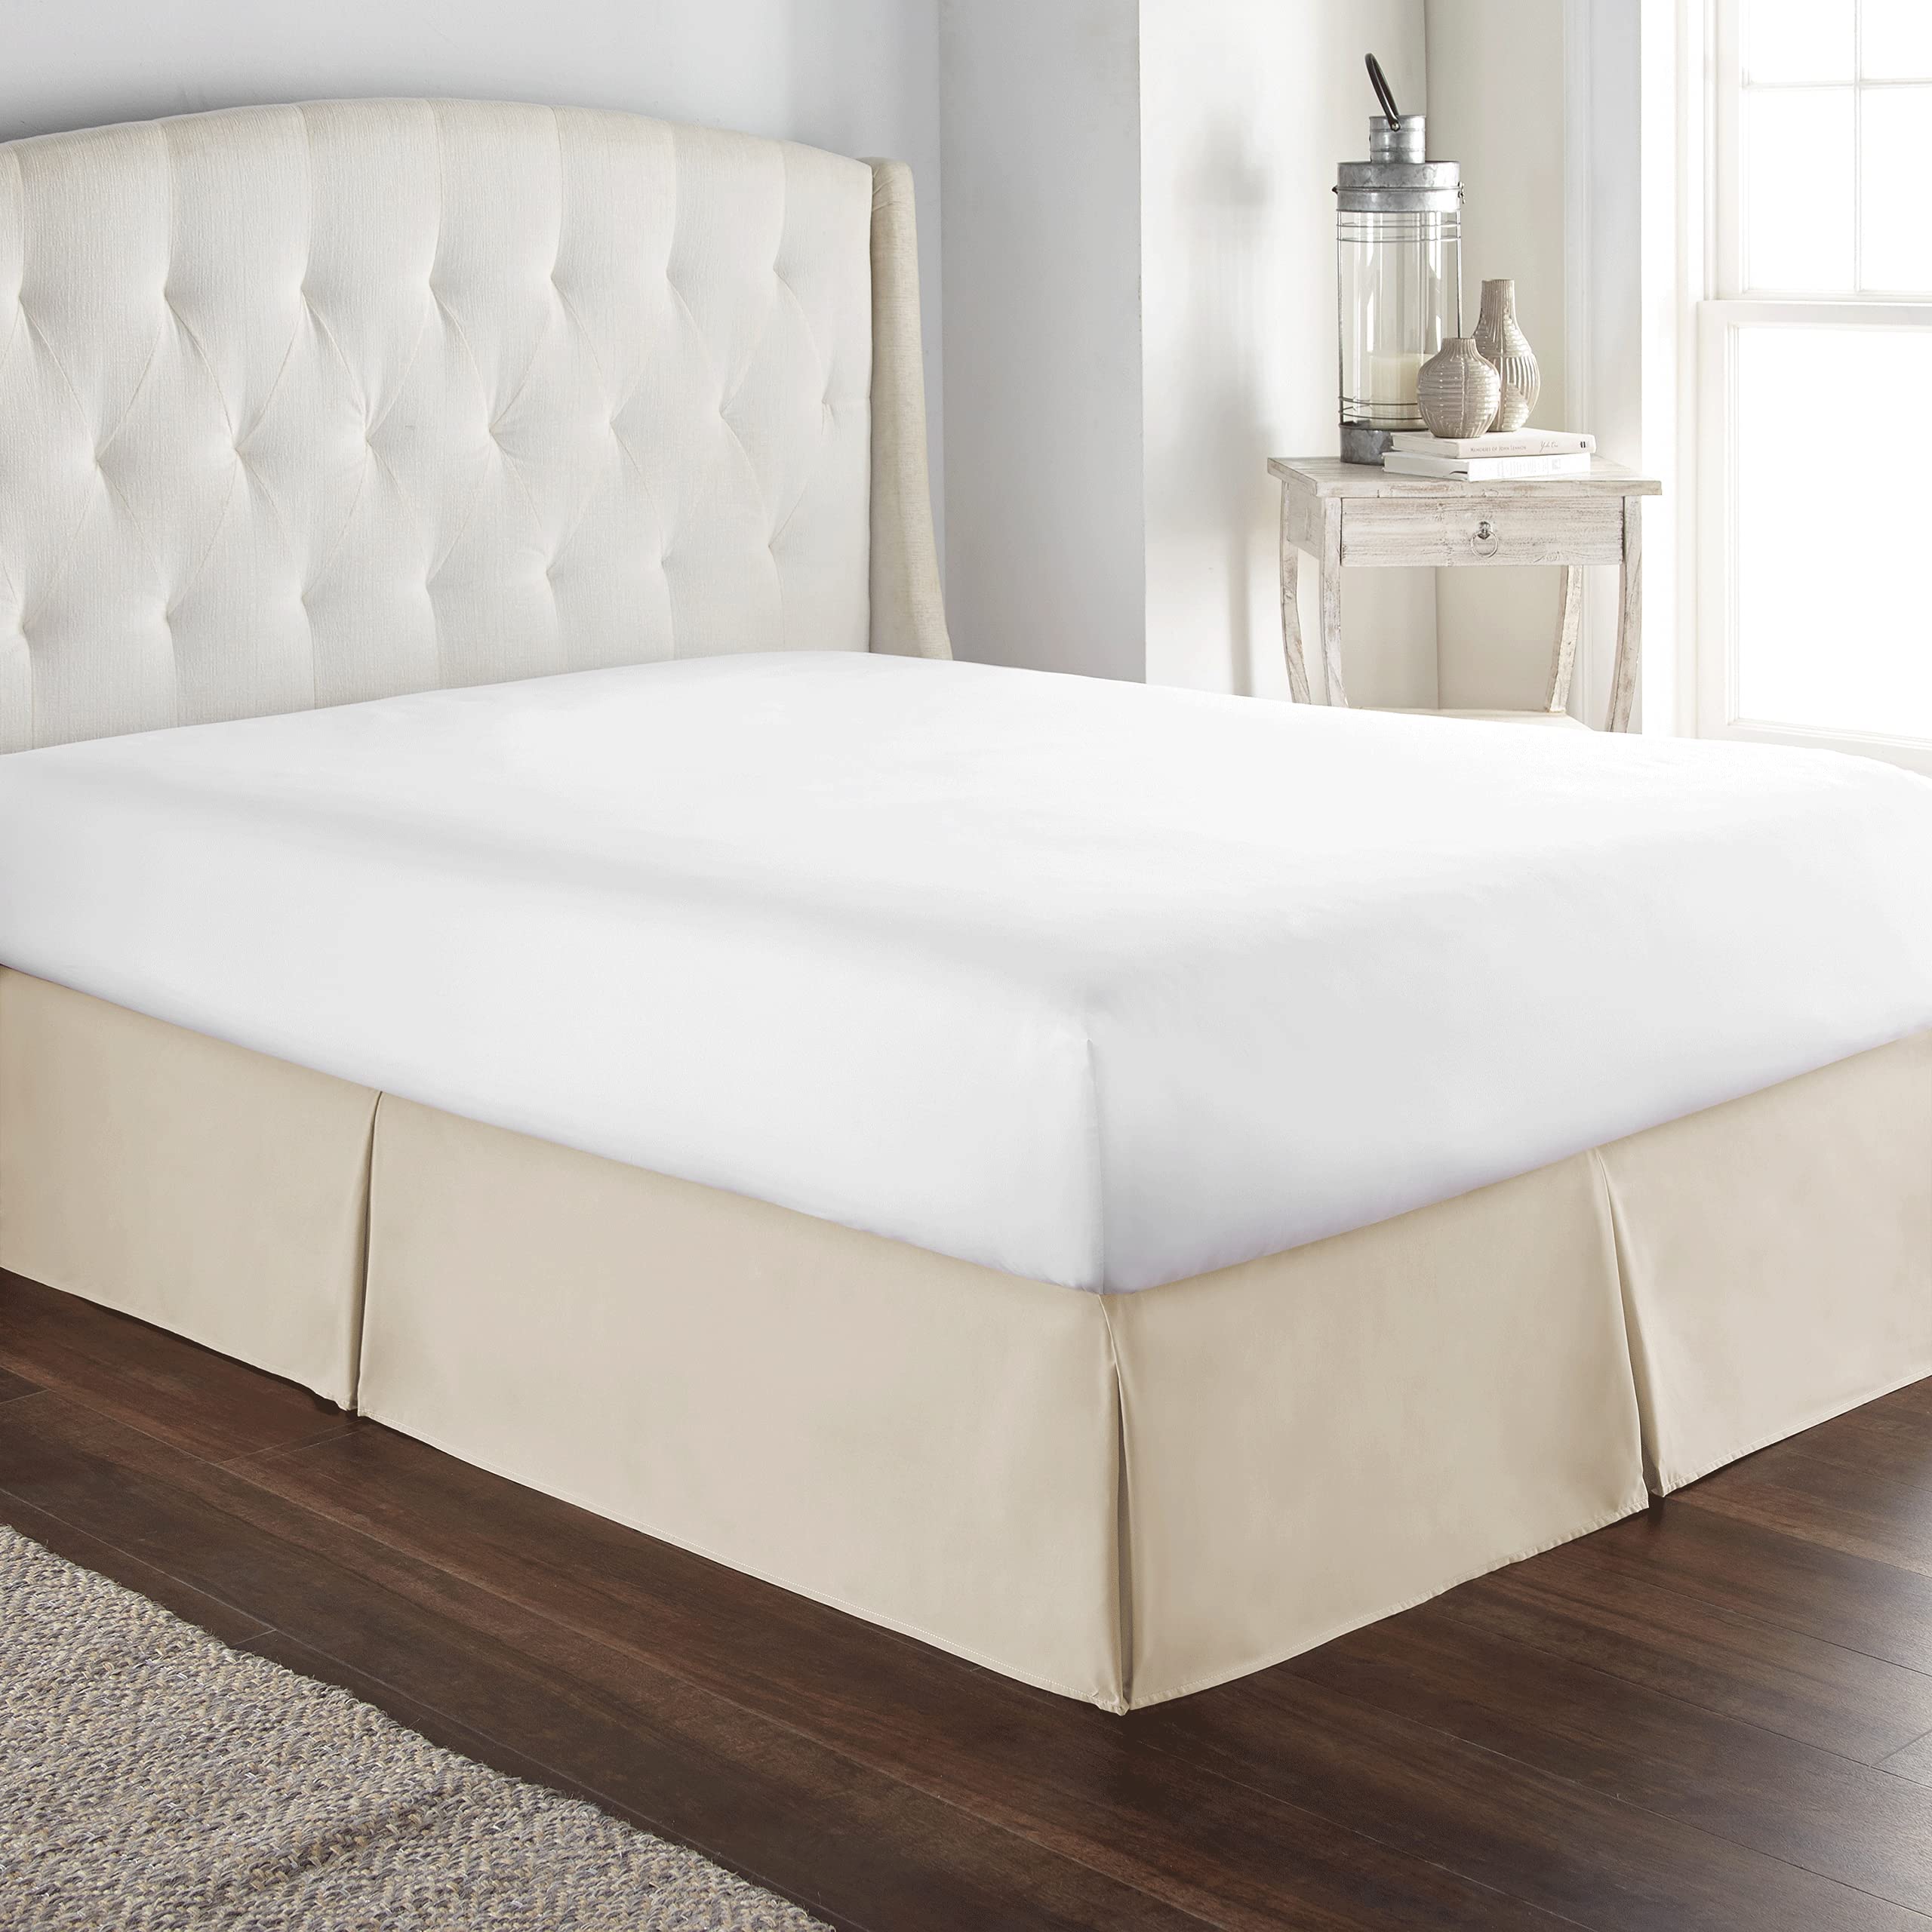 Book Cover HC Collection Cream Twin Bed Skirt - Dust Ruffle w/ 14 Inch Drop - Tailored, Wrinkle & Fade Resistant